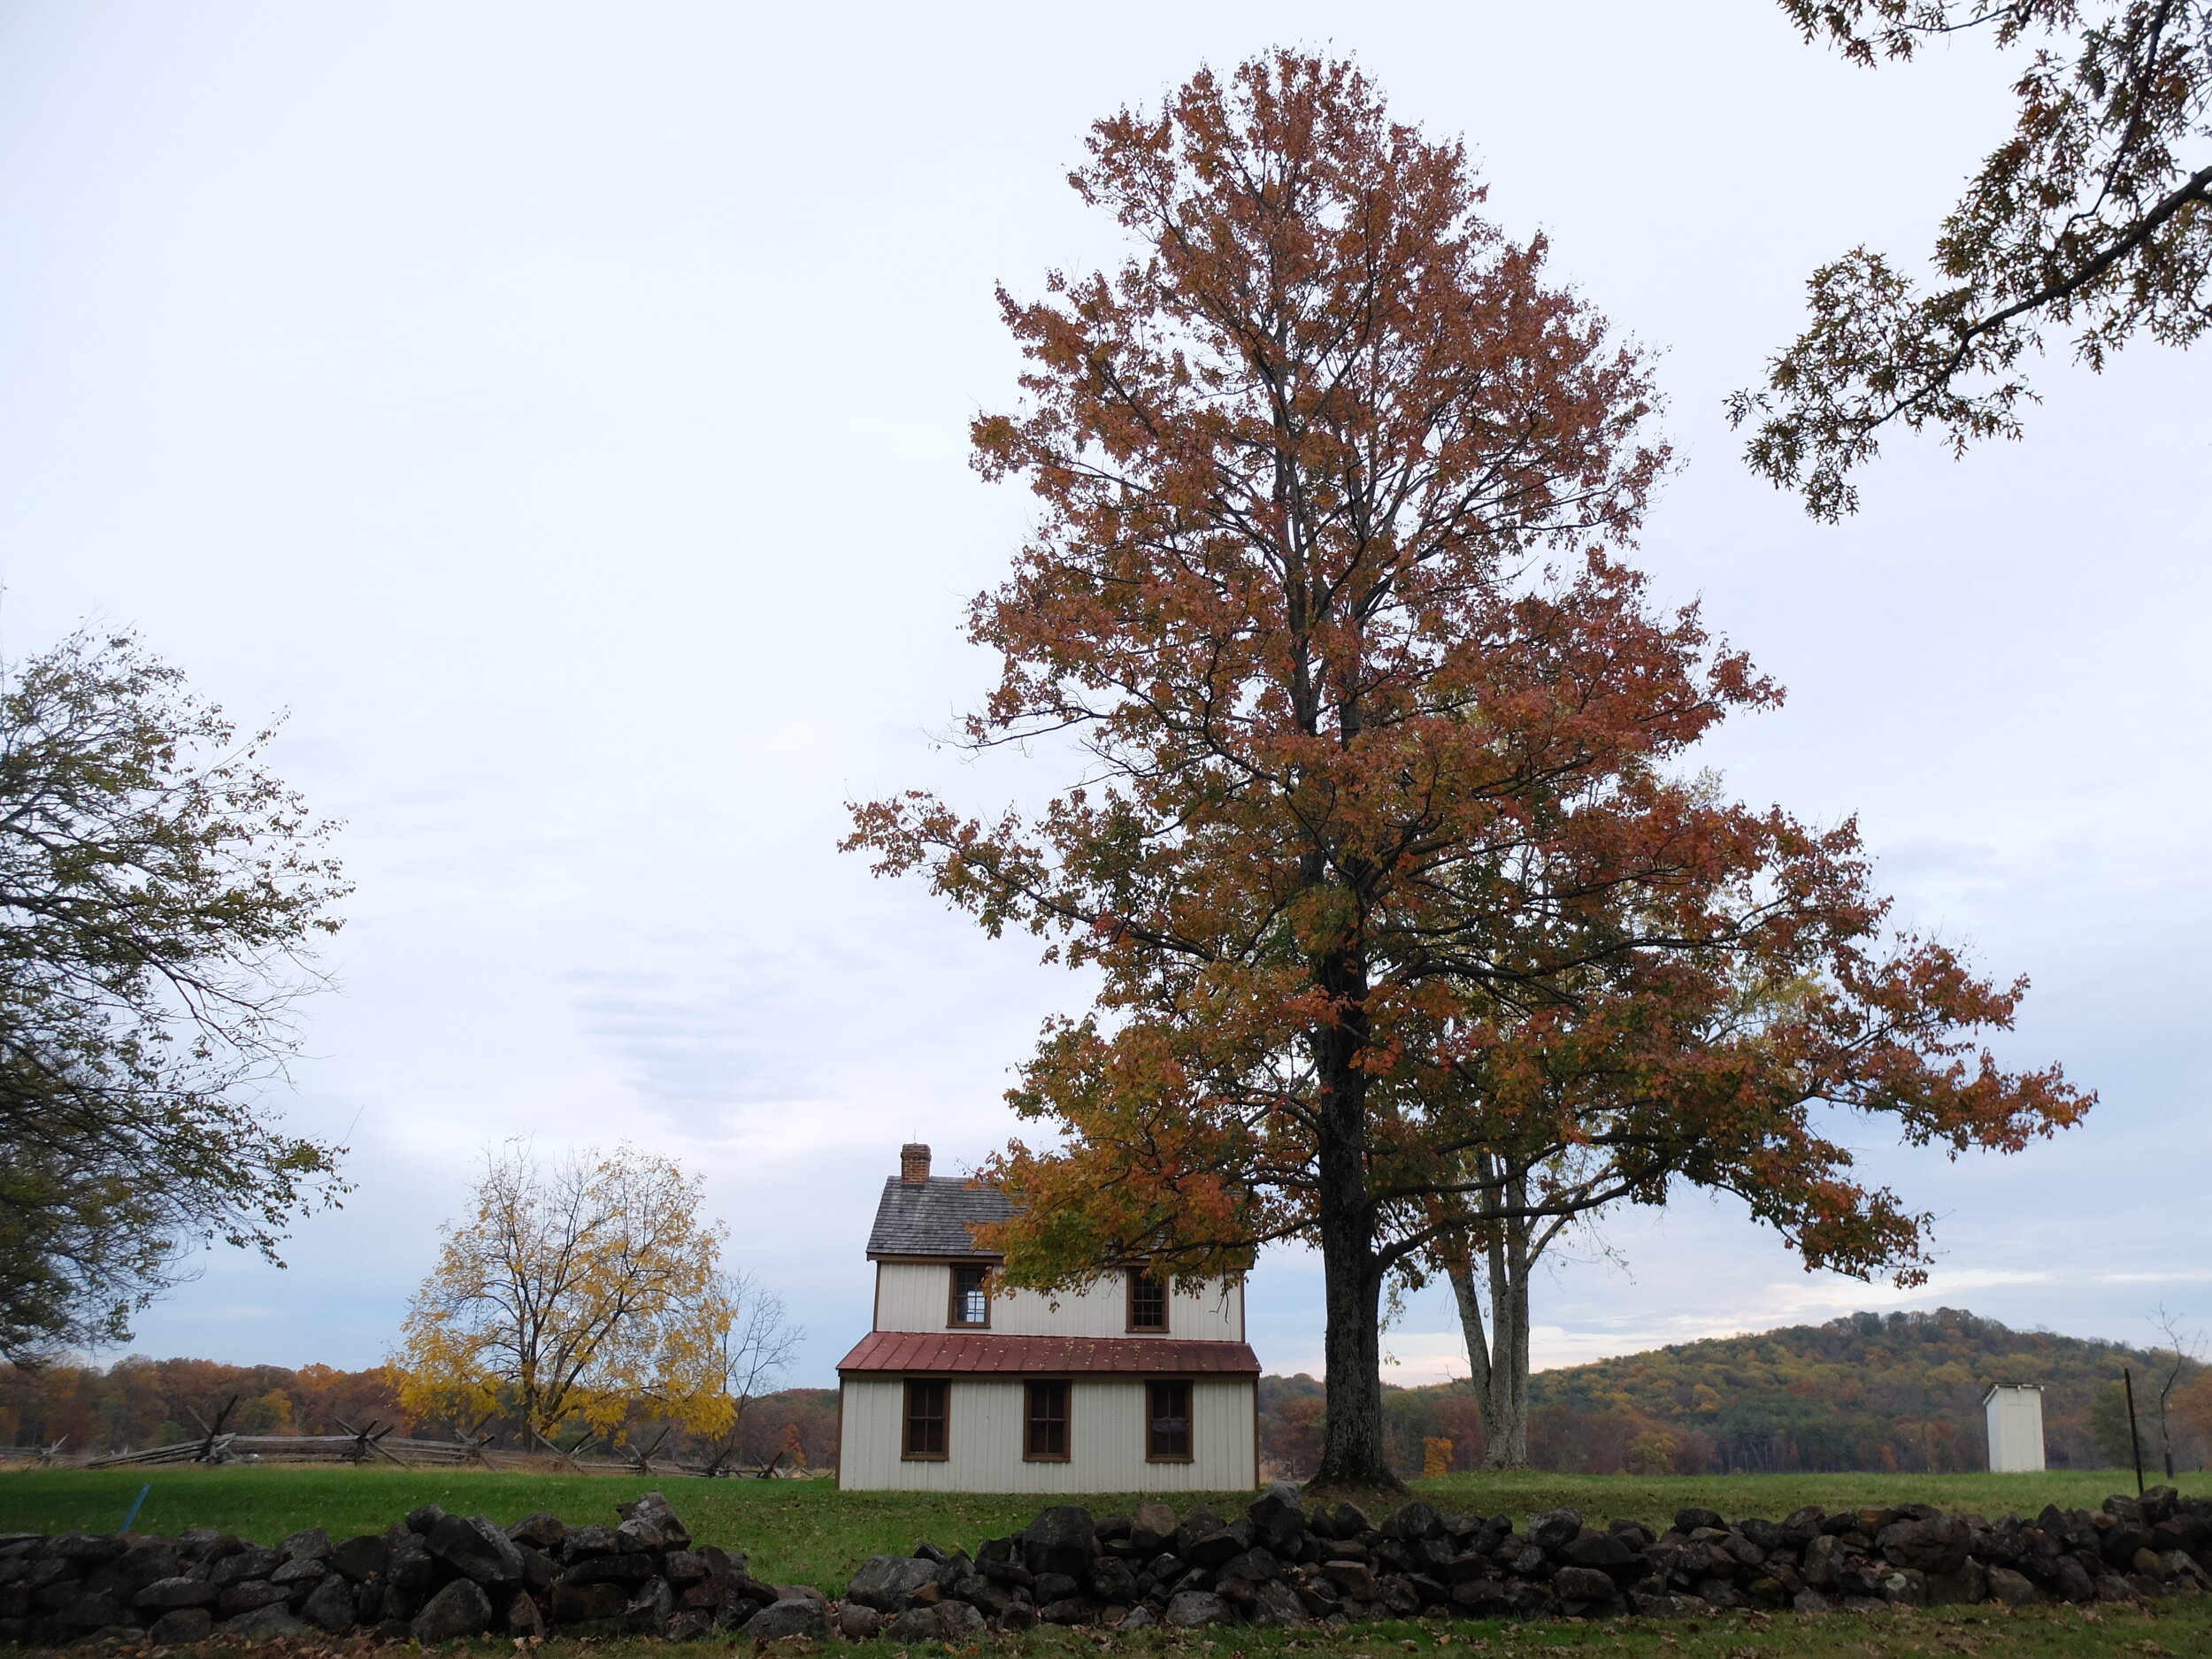 The Snyder Farm survived the 3 days of fighting.  Big Round Top, the topographic high point in which several engagements resulted in Medals of Honor being awarded, is in the background.